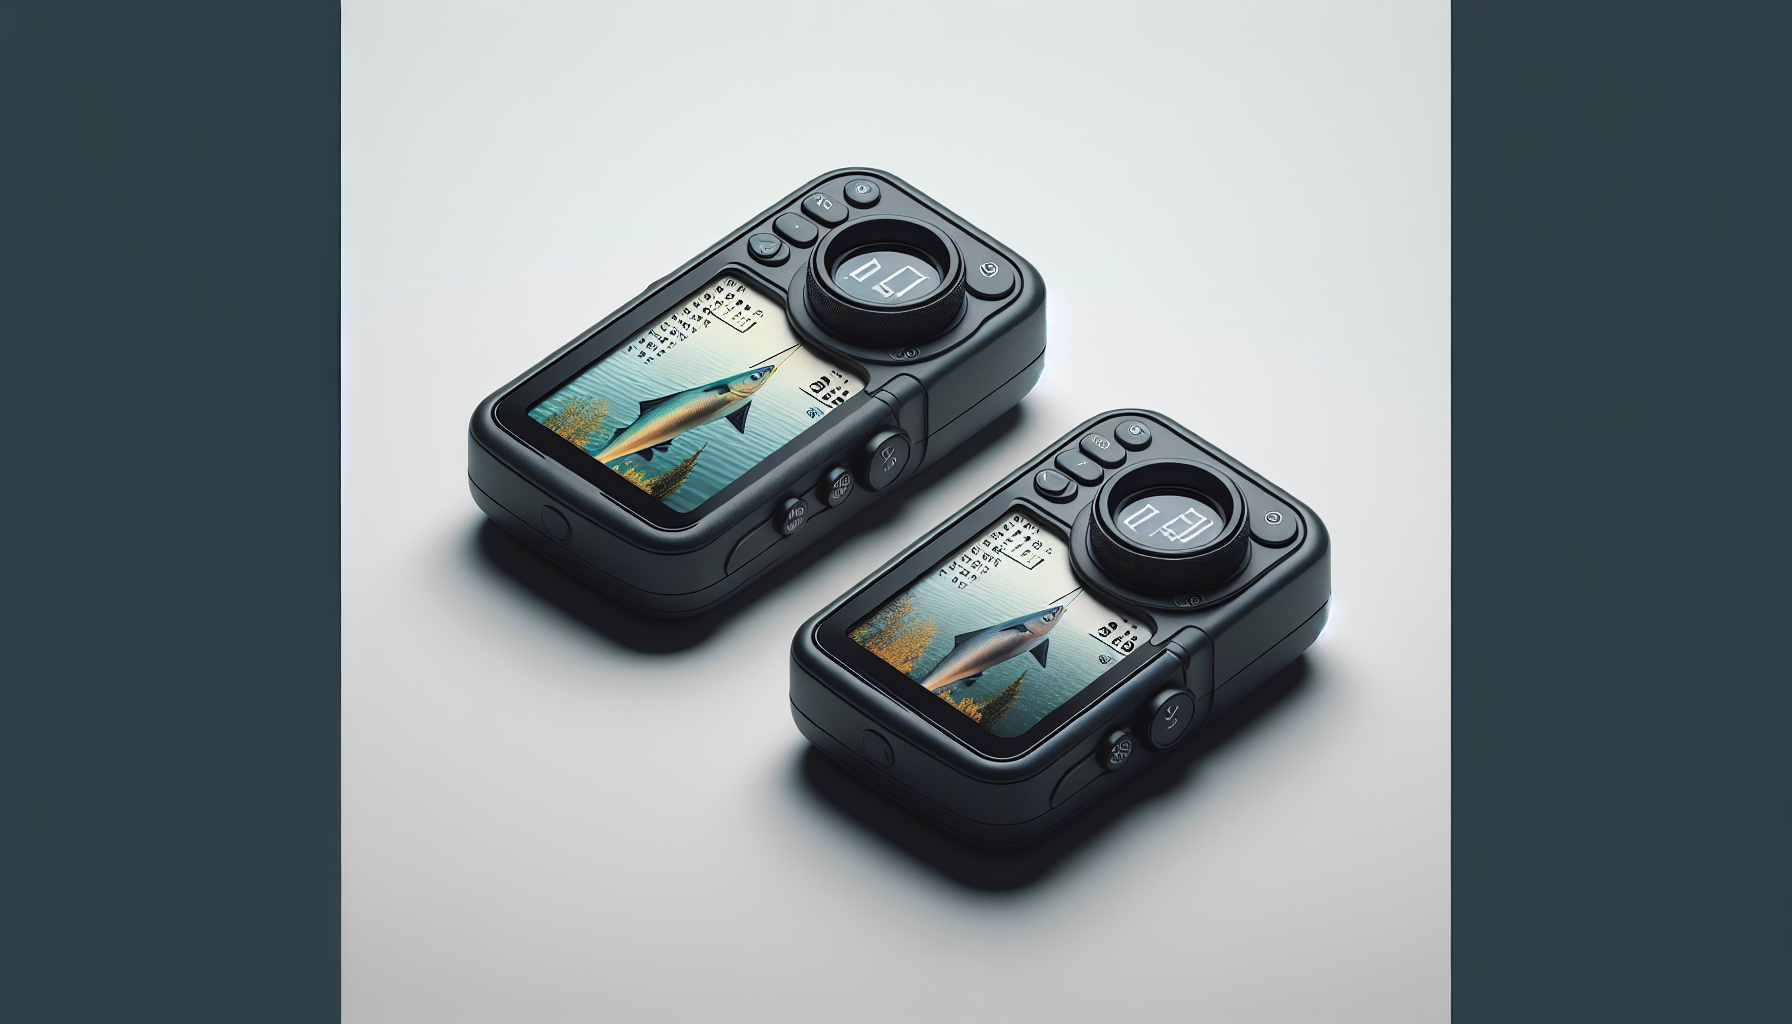 What Is The Difference Between Humminbird 5 And 7?